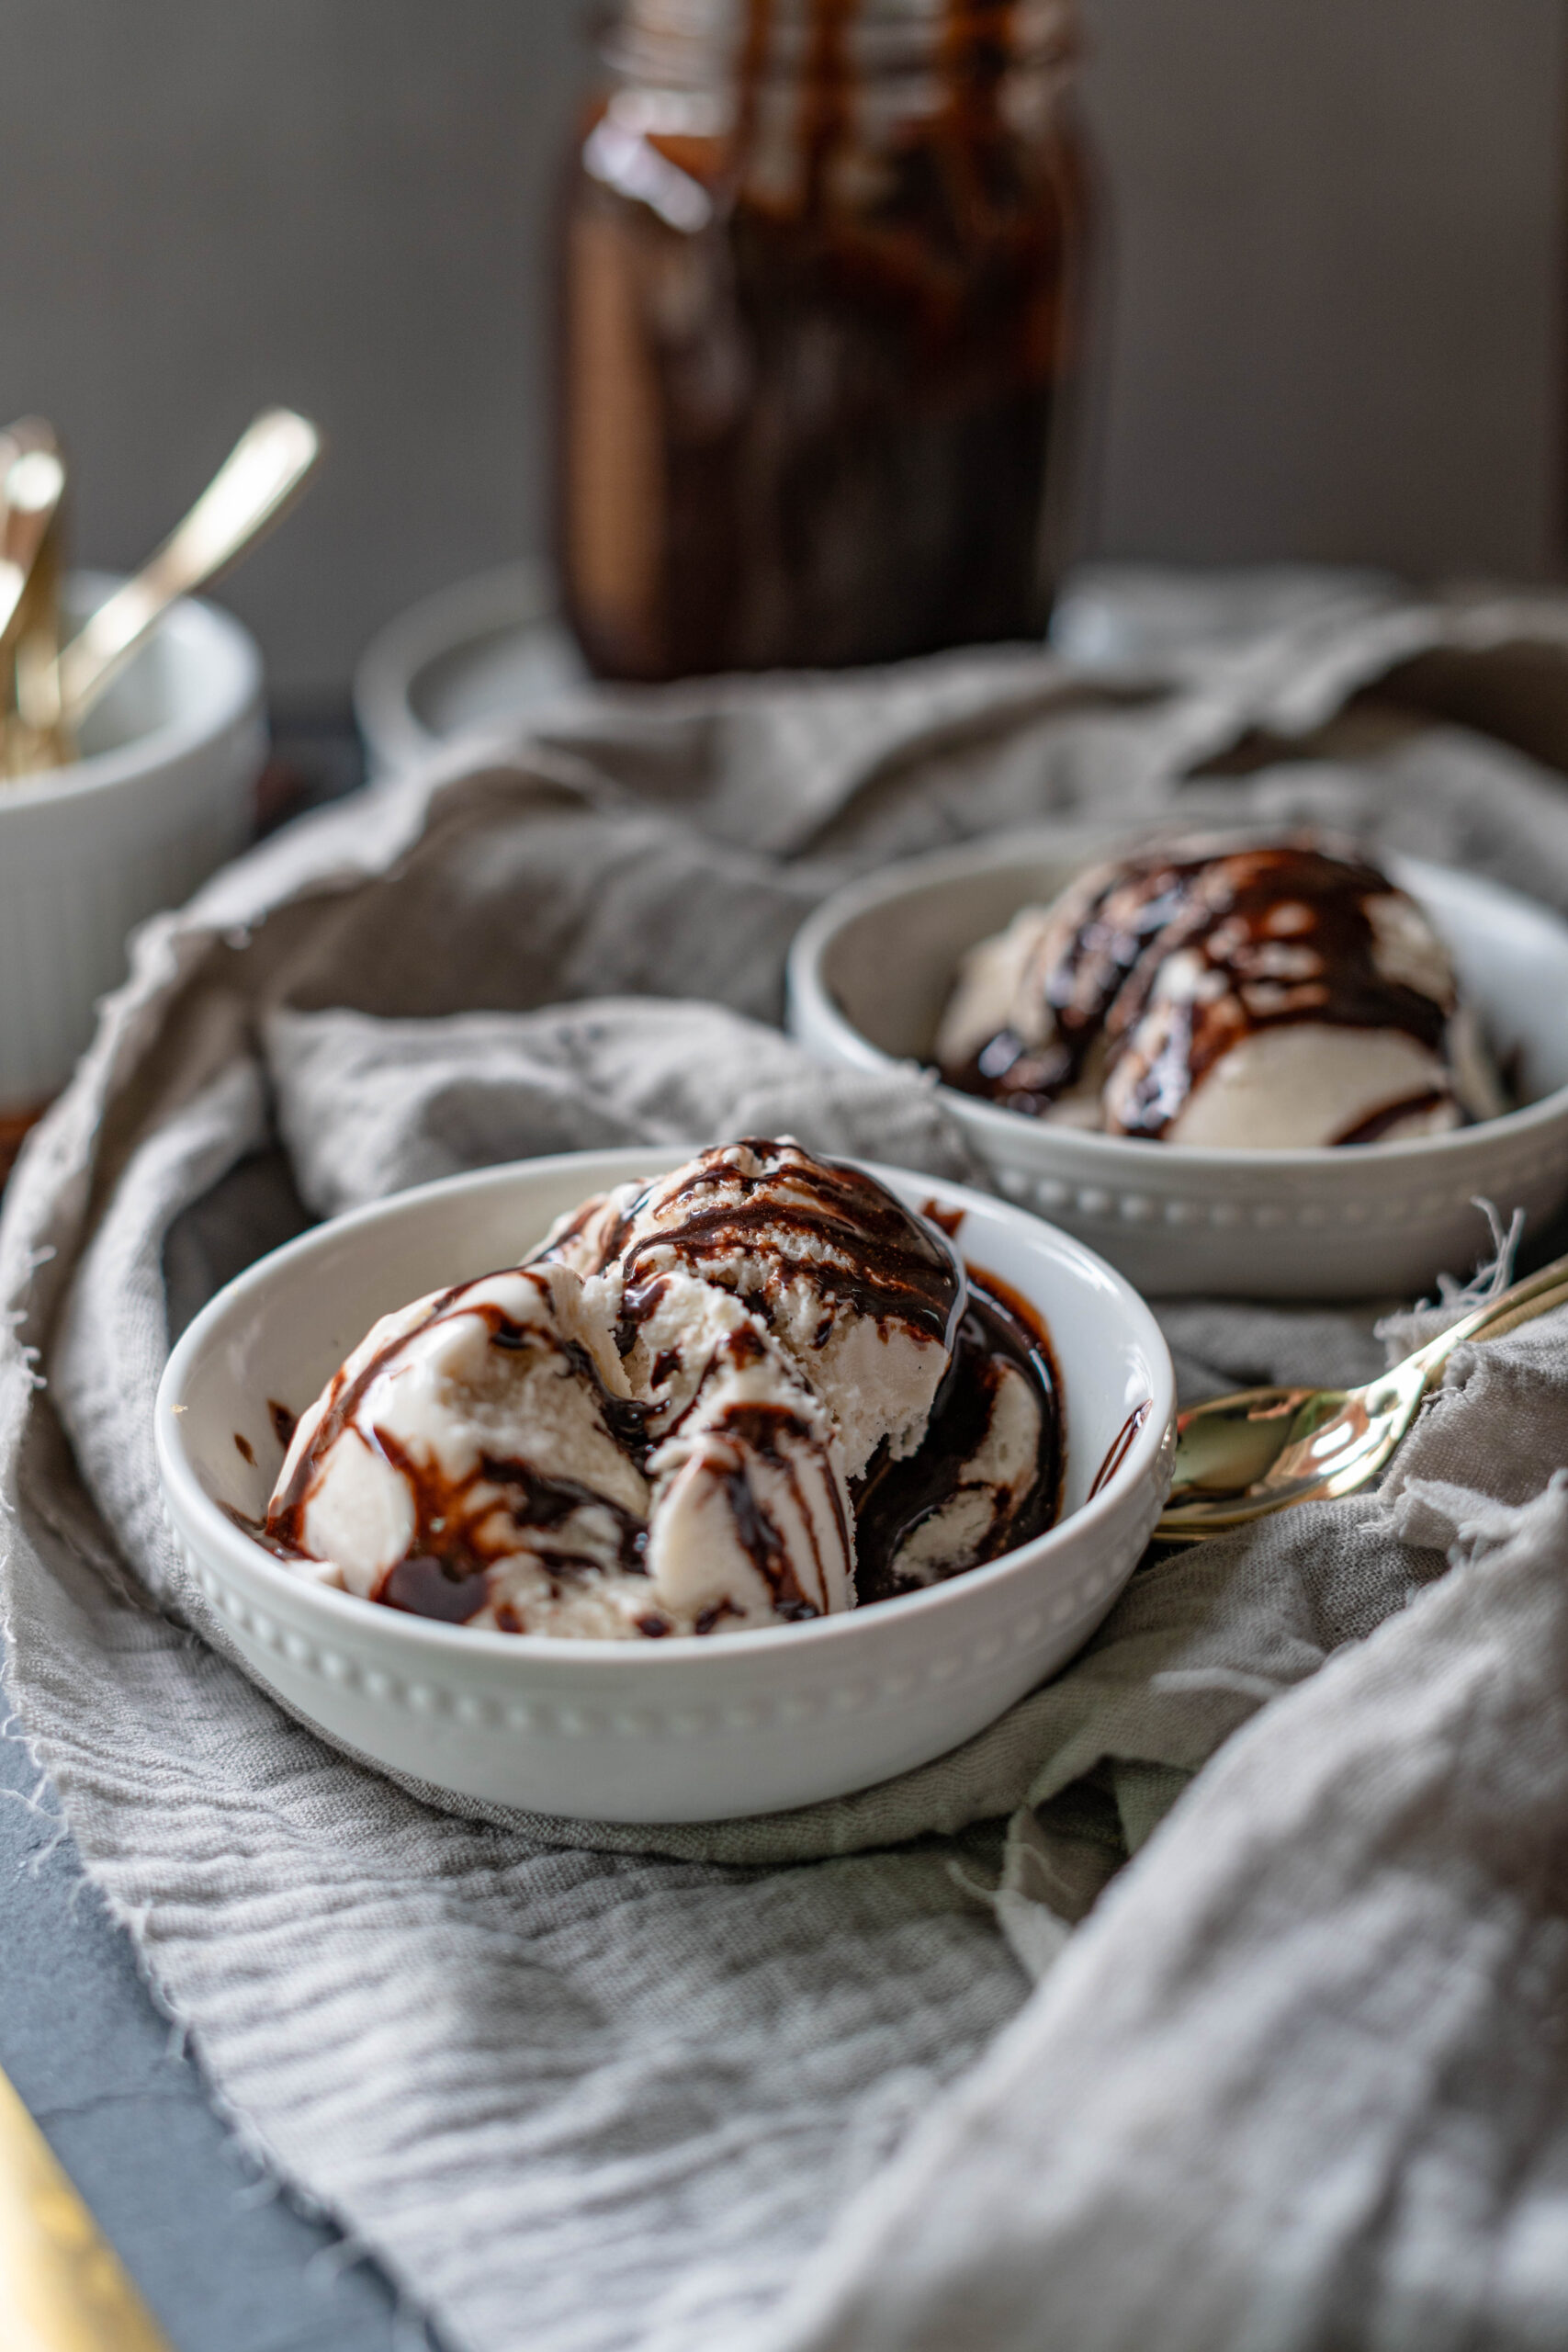 Two bowls of ice cream with vegan chocolate sauce drizzled on them on a grey fabric. 